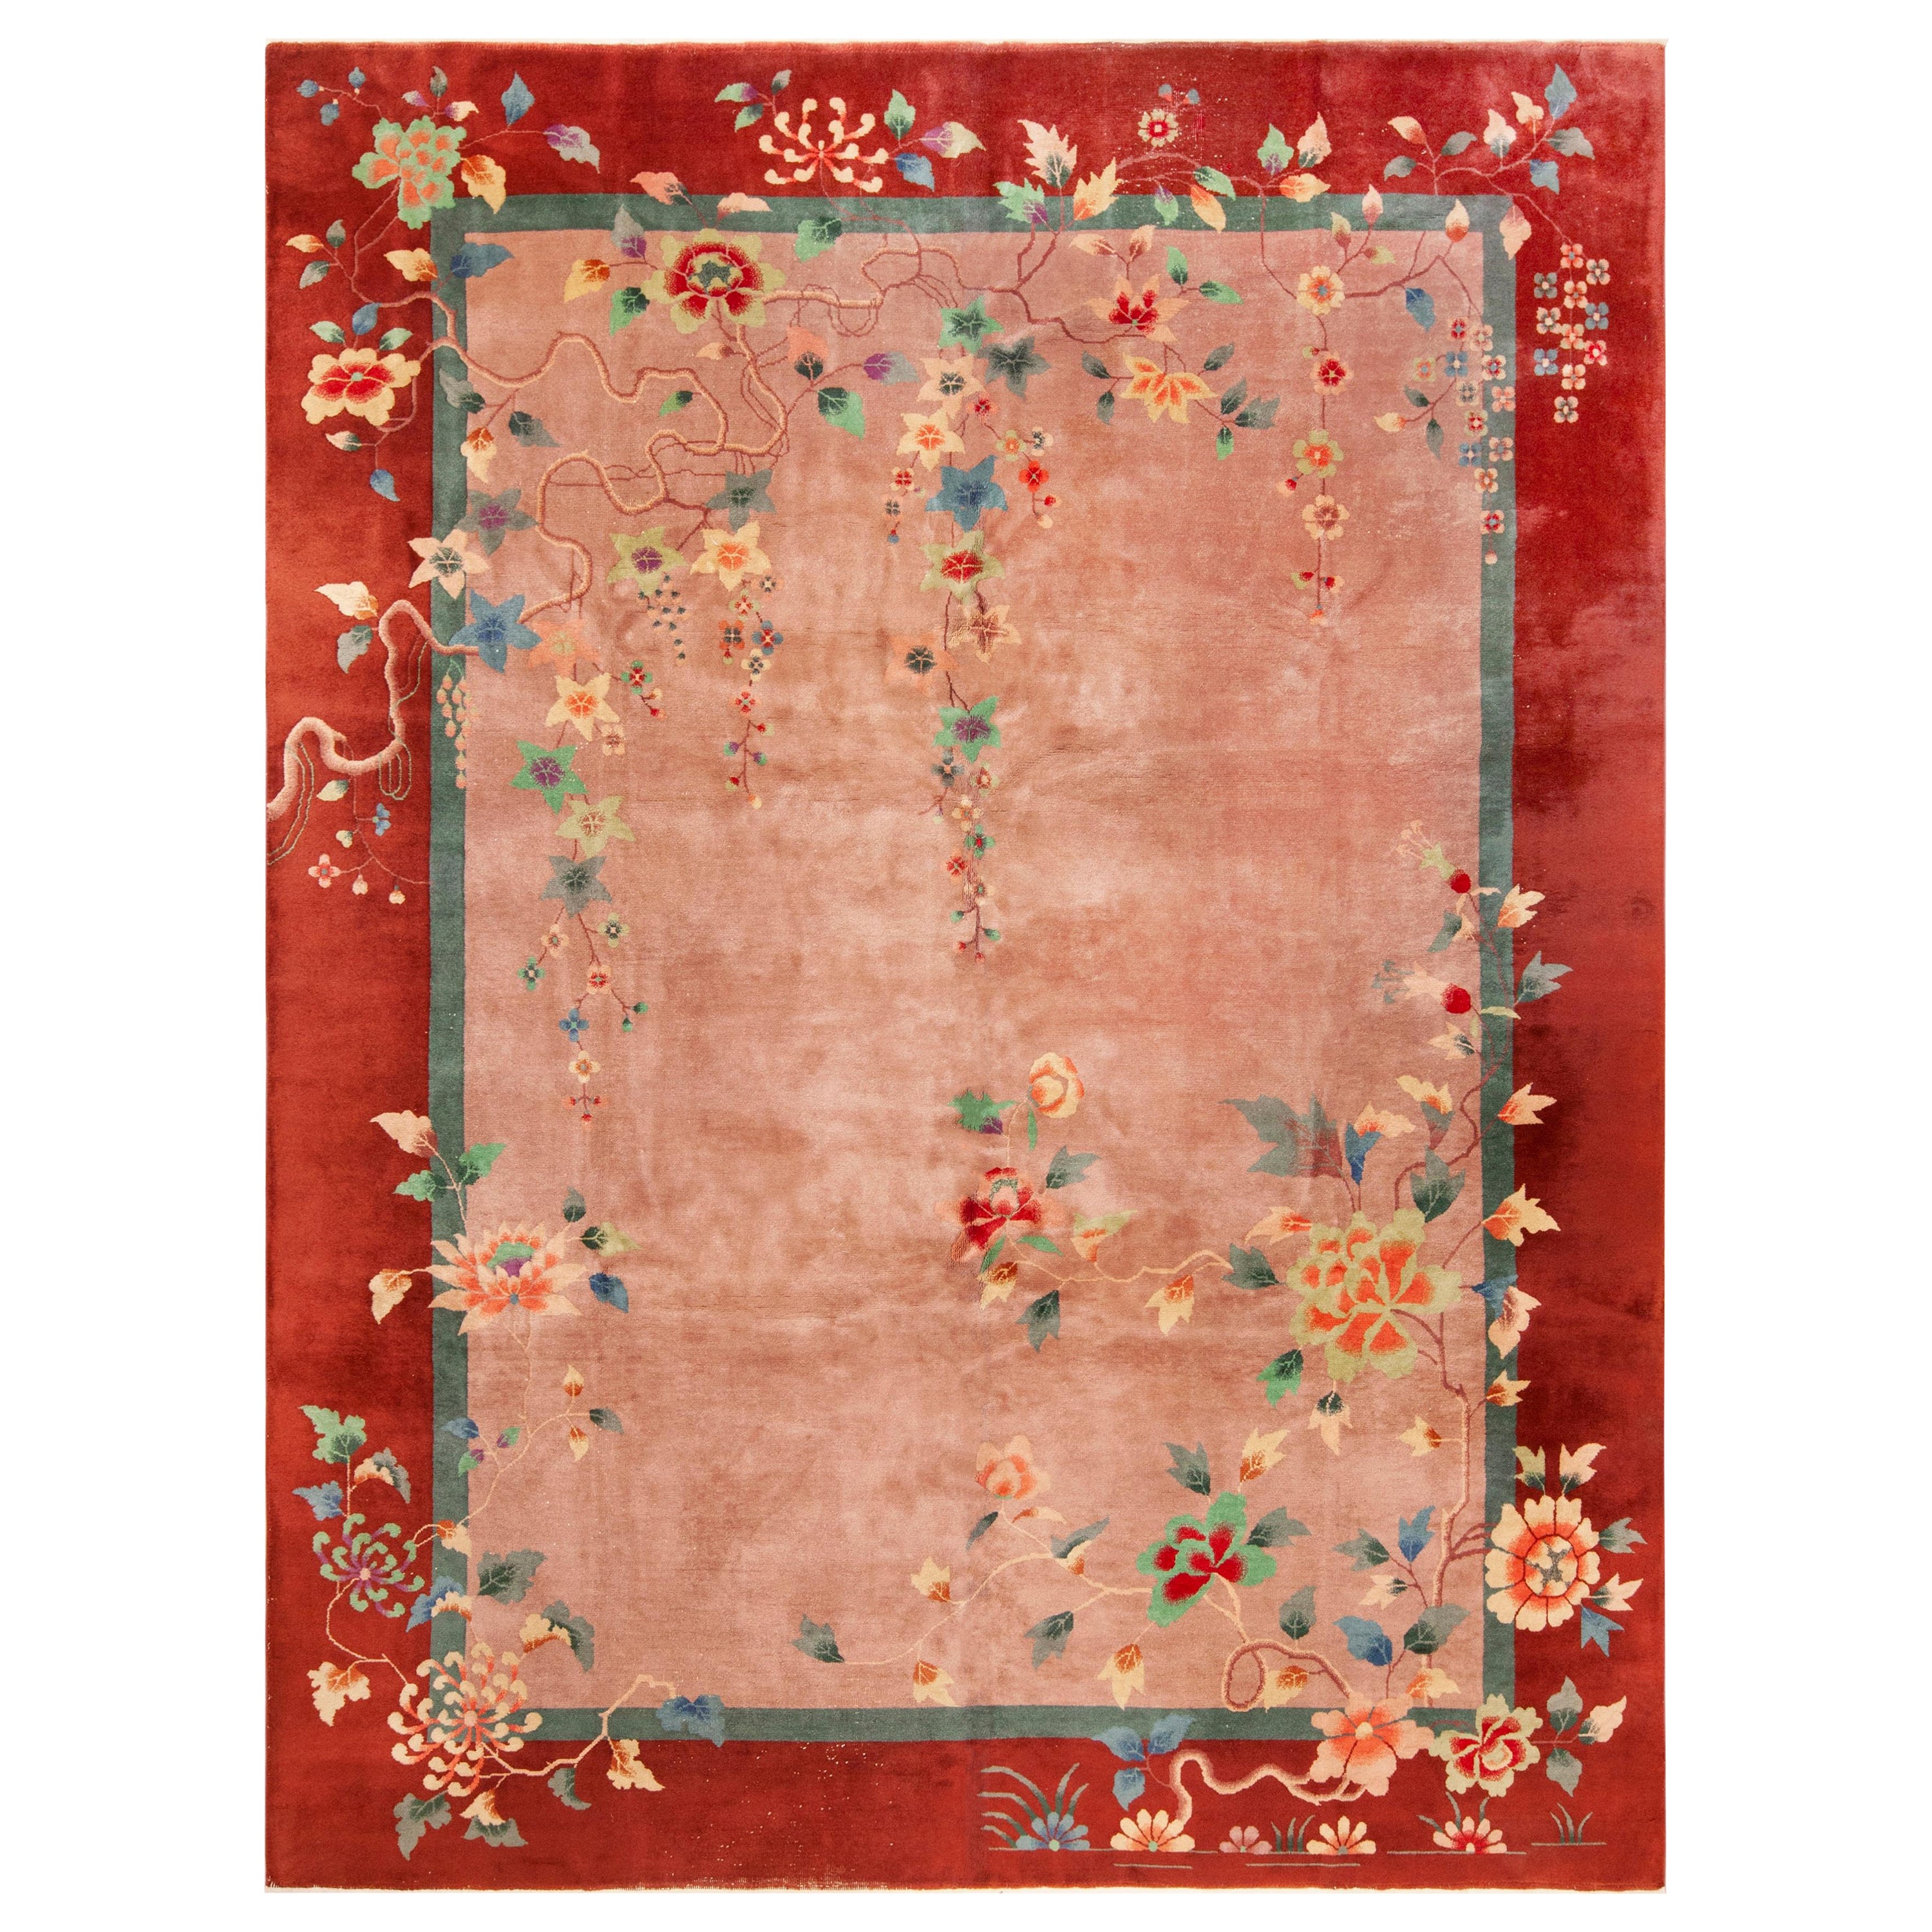 Charming Salmon Pink Antique Chinese Art Deco Rug 8'10" x 11'6" For Sale